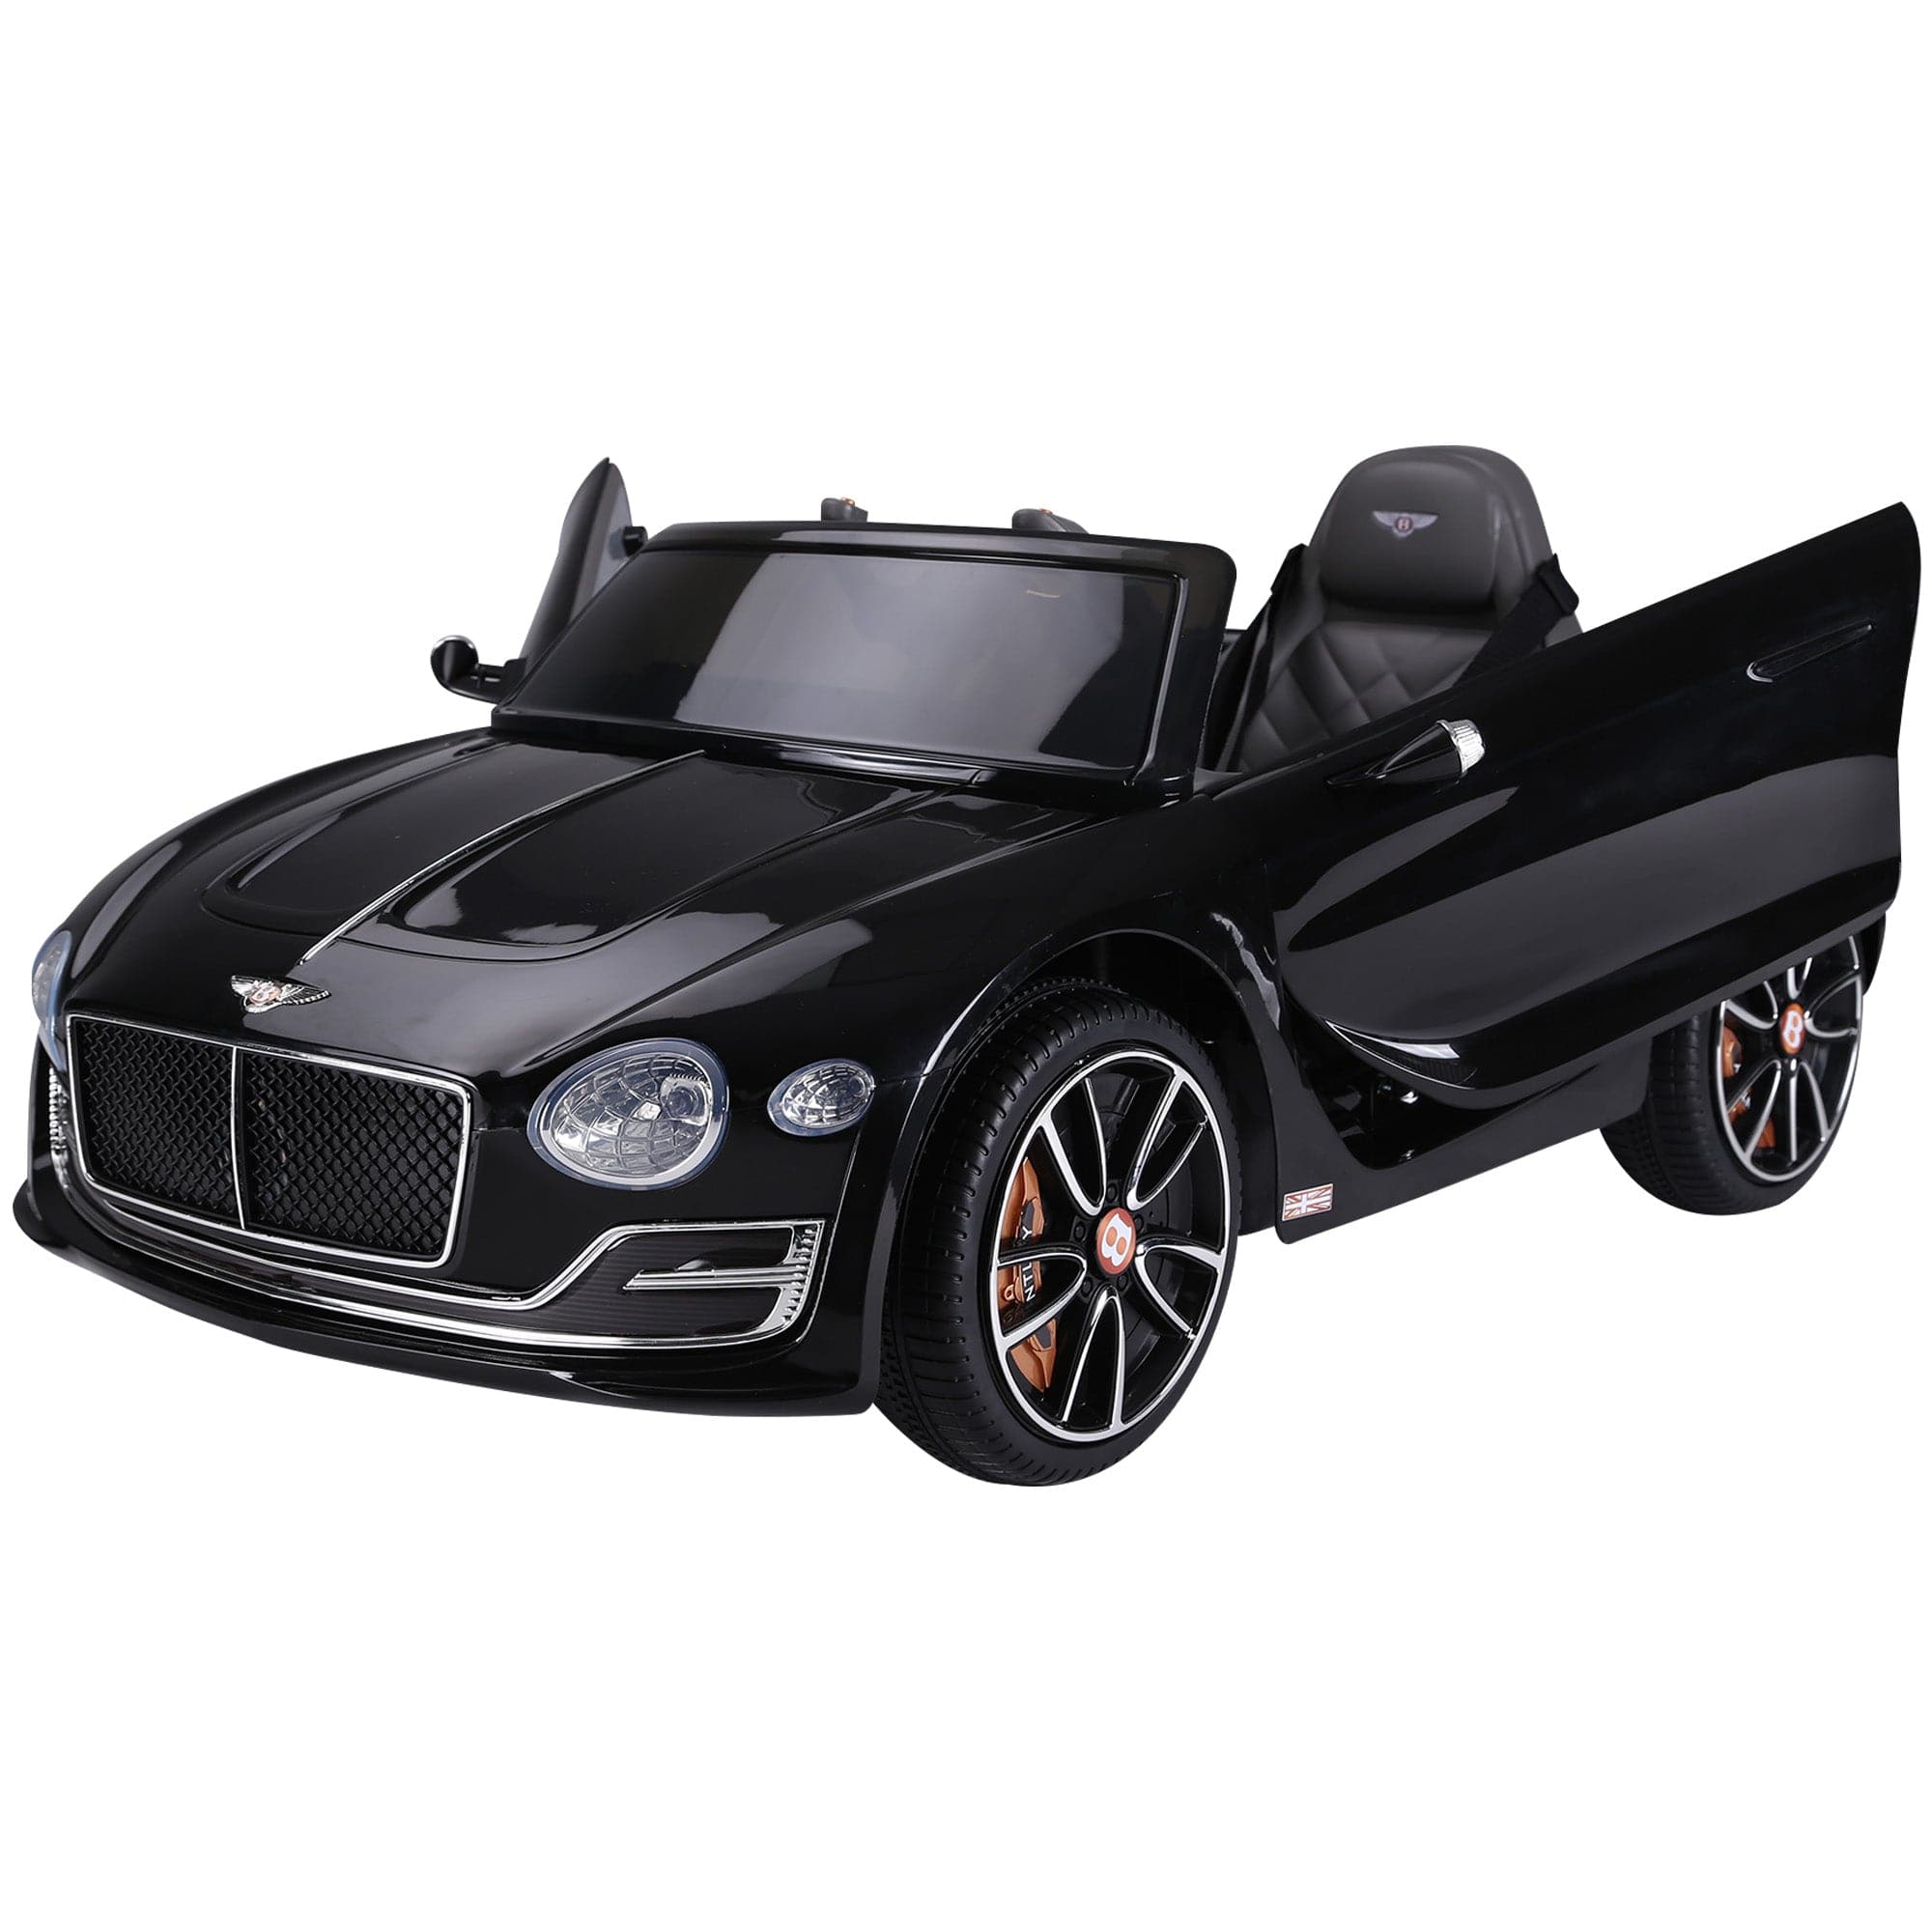 HOMCOM Bentley GT 12V Electric Kids Ride On Toy Car with LEDs, Music & Remote Control for 3-8 Years - Black